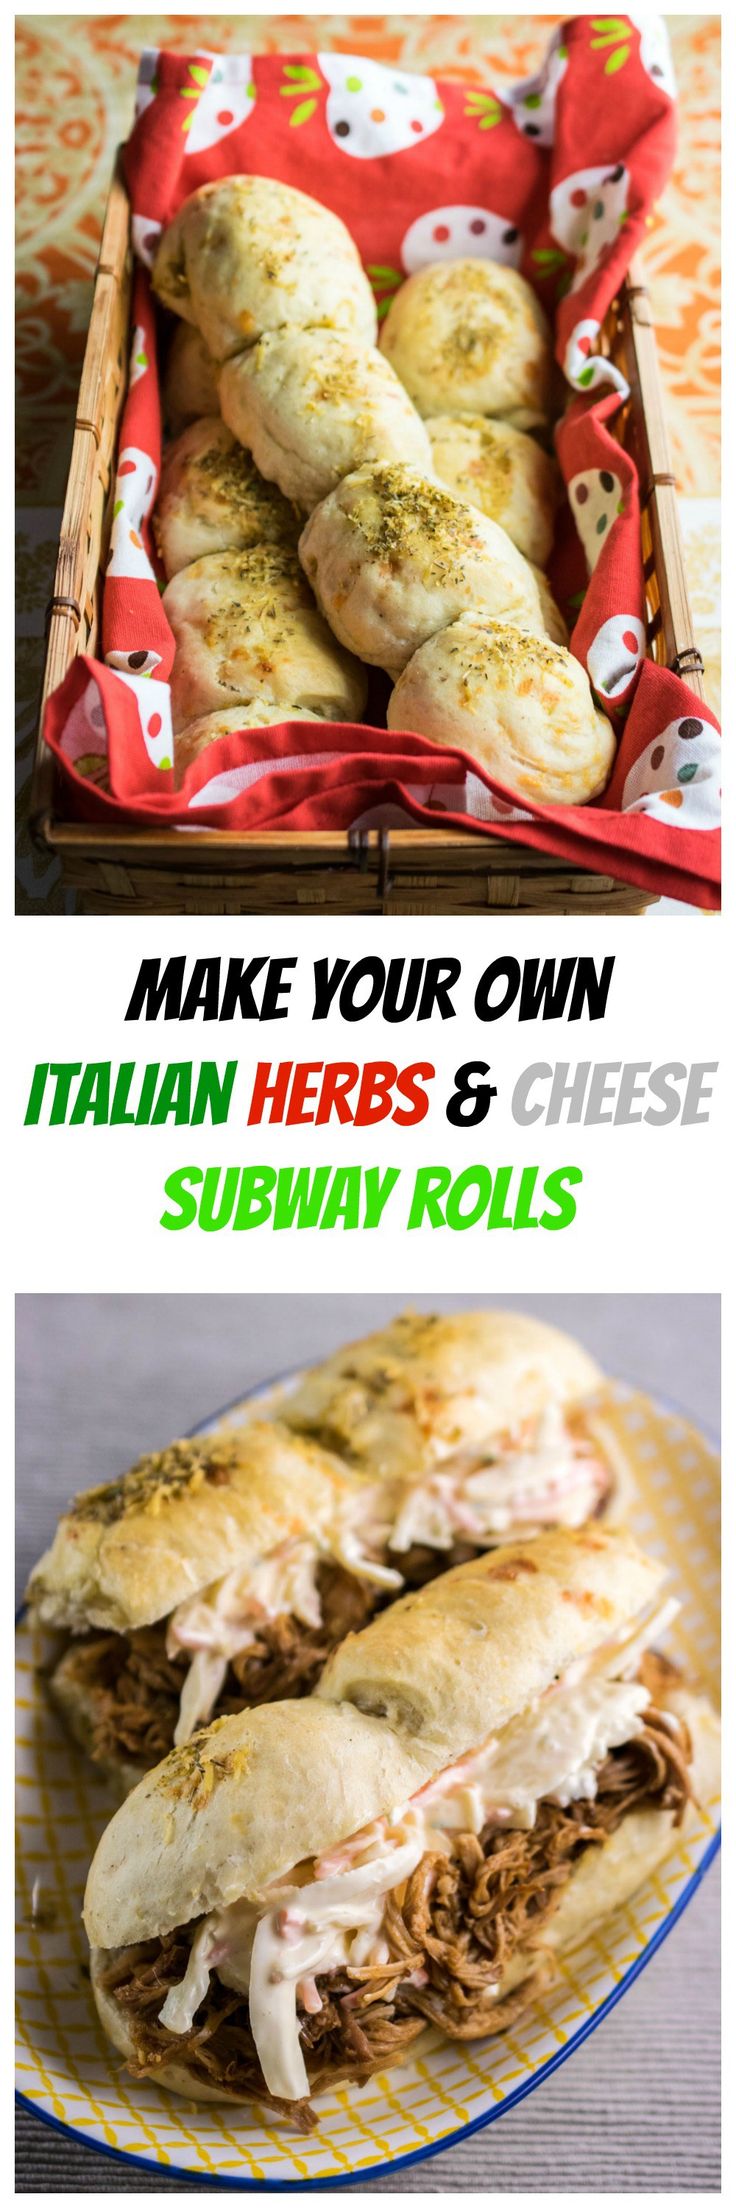 Subway Cold Cut Combo - Italian Herb/Cheese Bread, No Pickles or Jalap